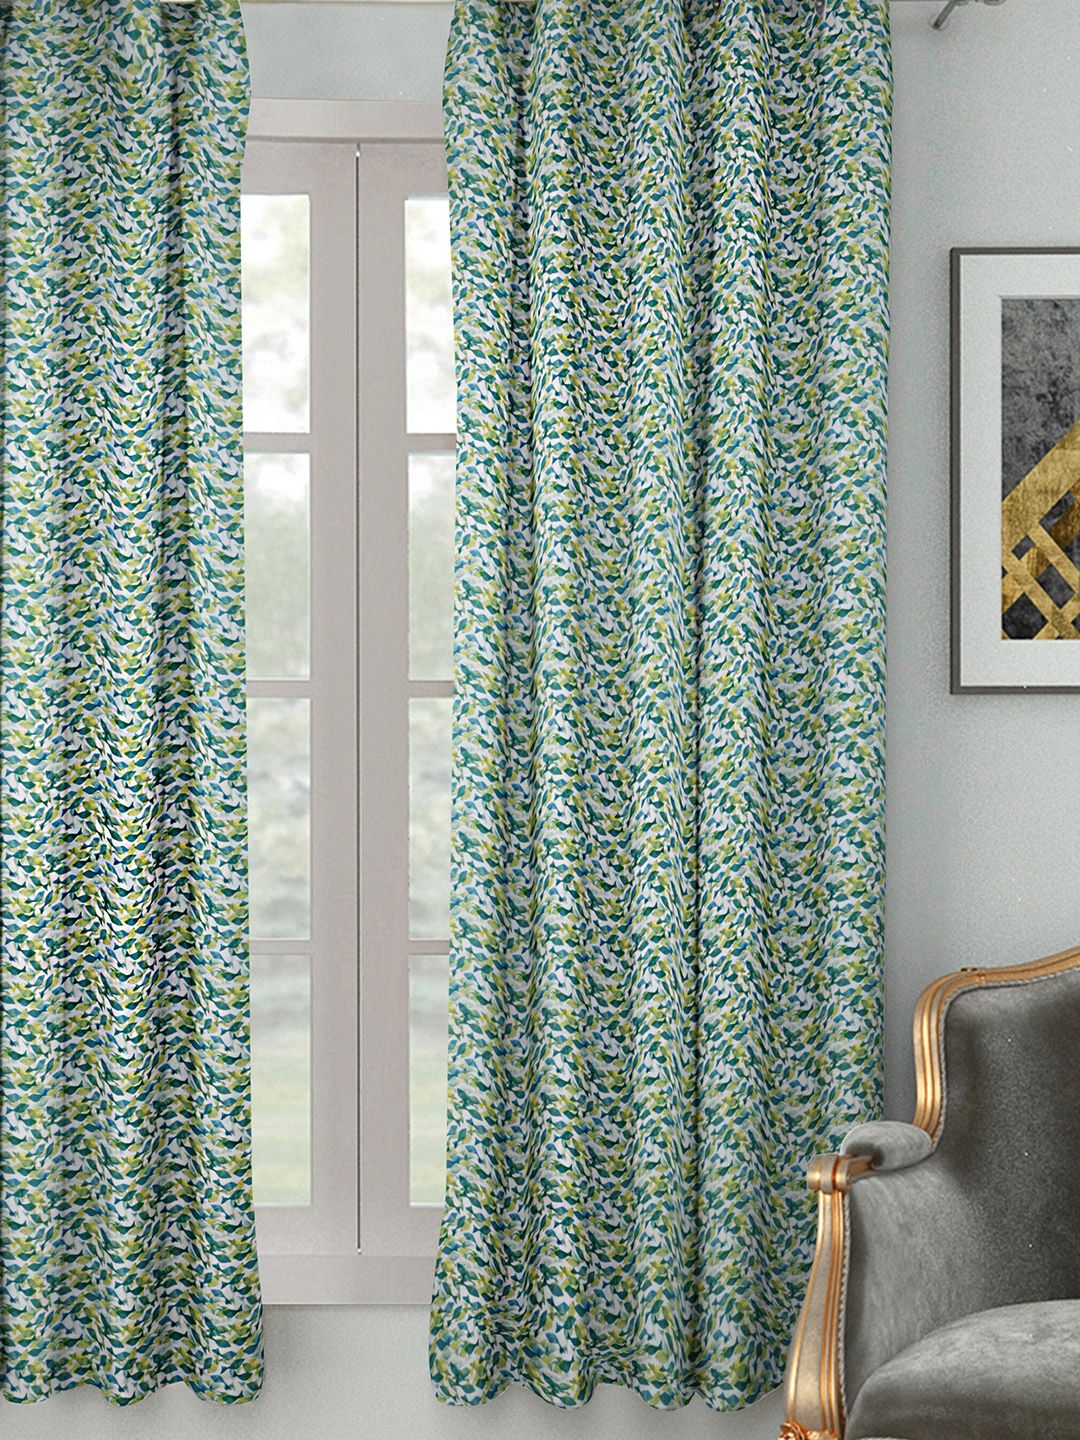 HOUZZCODE Green & White Printed Black Out Window Curtain Price in India